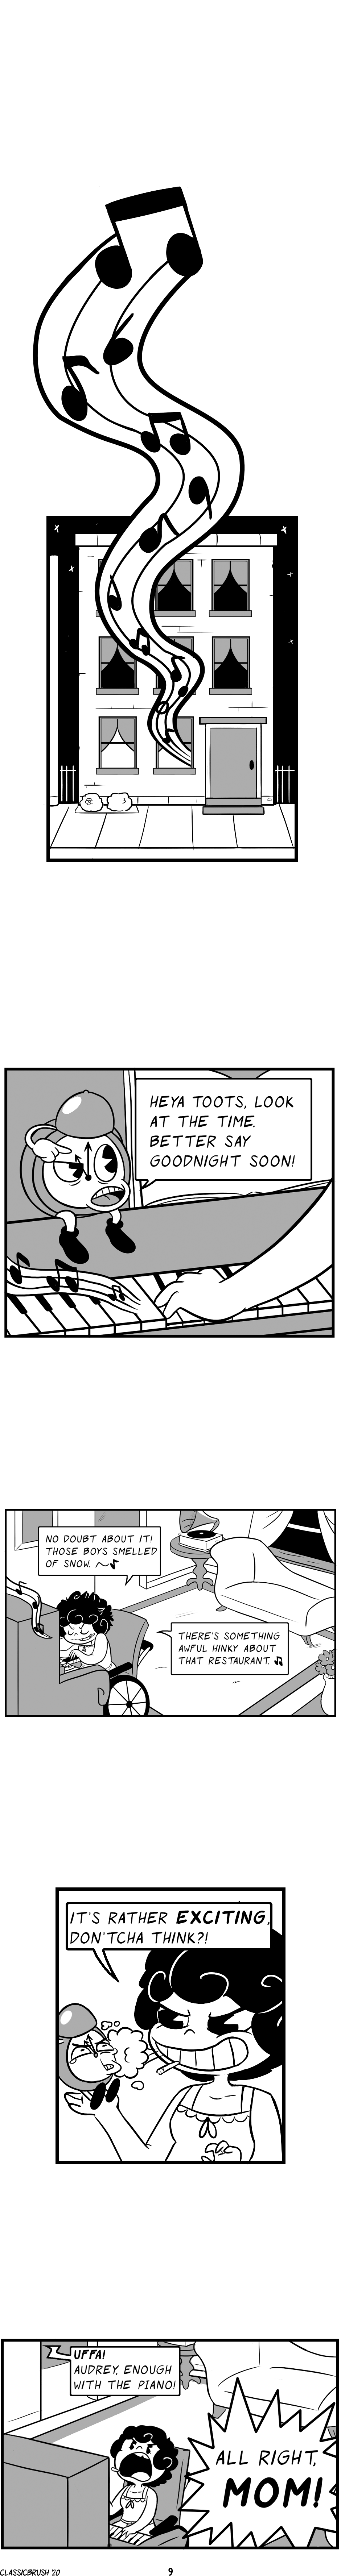 Panel 1: Cut to later in the night at a row house. A string of music notes emit from the first floor window. Panel 2: The alarm clock from the morning sits on the ledge of a piano, pointing to the time at roughly 11pm. â€œHeya toots, look at the time. Better say goodnight soon!â€ Panel 3: Audrey is playing a piano in her living room while smoking a cigarette. â€œNo doubt about it! Those boys smelled of snow.~â€ â€œThereâ€™s something awful hinky about that restaurant.~â€ Panel 4: Audrey holds the alarm clock in the palm of her har with a mischievous grin, blowing smoke in the clockâ€™s face. â€œItâ€™s rather EXCITING, donâ€™tcha think?!â€ Panel 5: A voice from another room calls out. â€œUffa! Audrey, enough with the piano!â€ Audrey yells back, frustrated. â€œAll right, MOM!â€